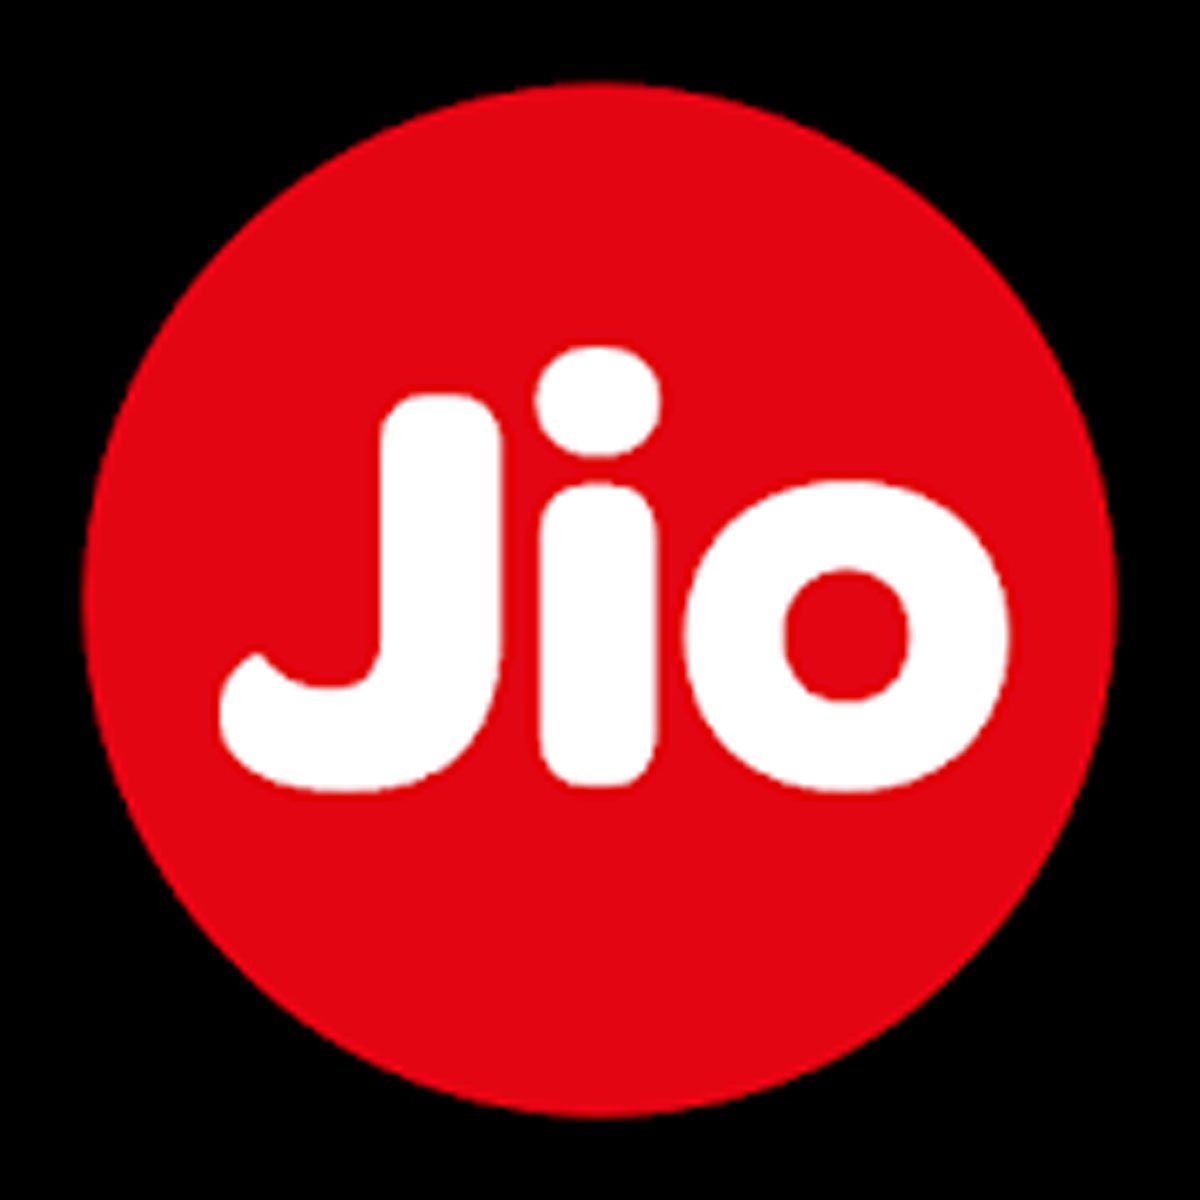 check data balance in Jio without My Jio app